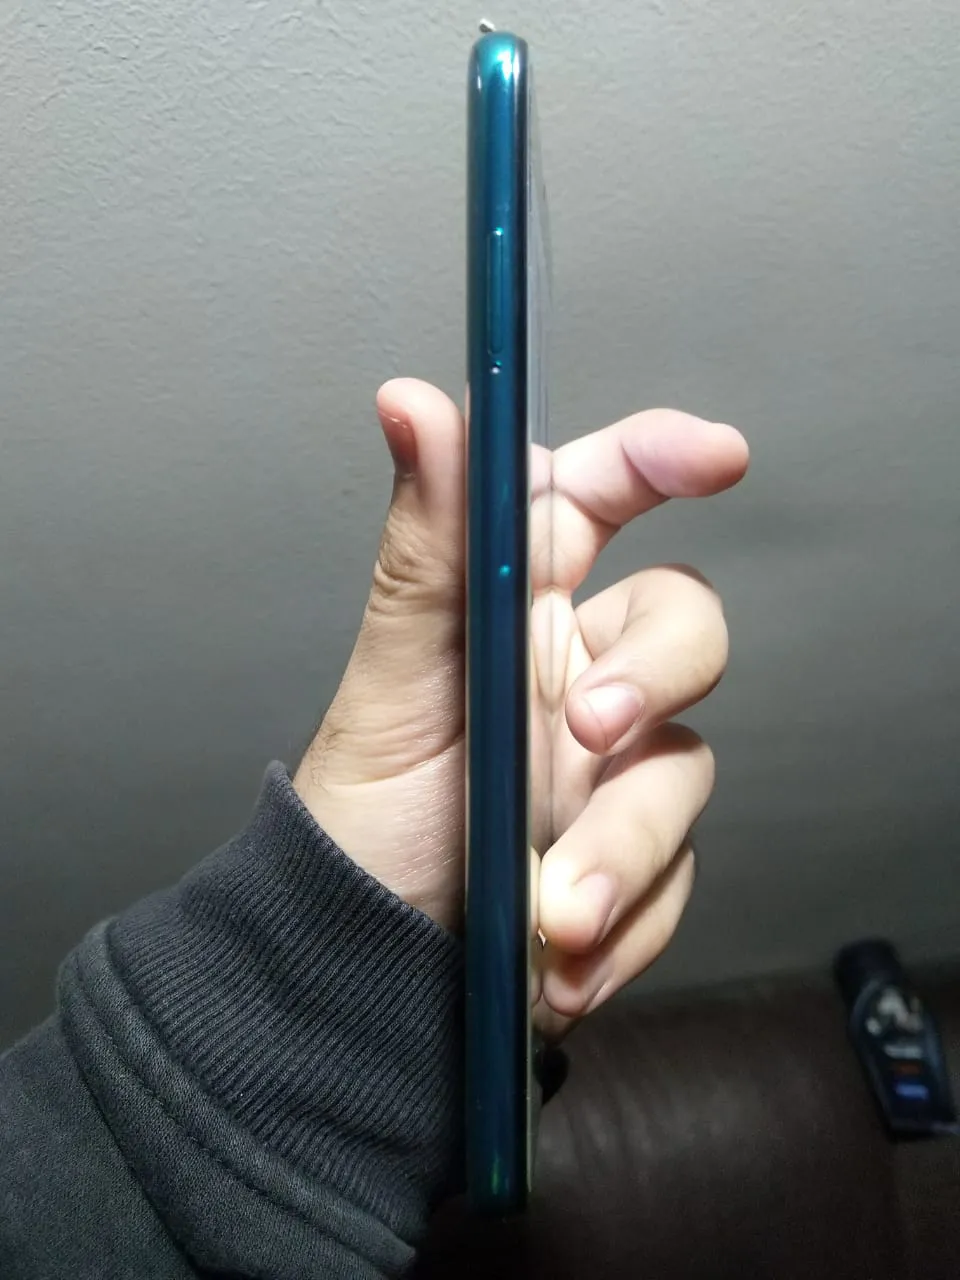 Redmi note 8 pro(Forest Green) - photo 2